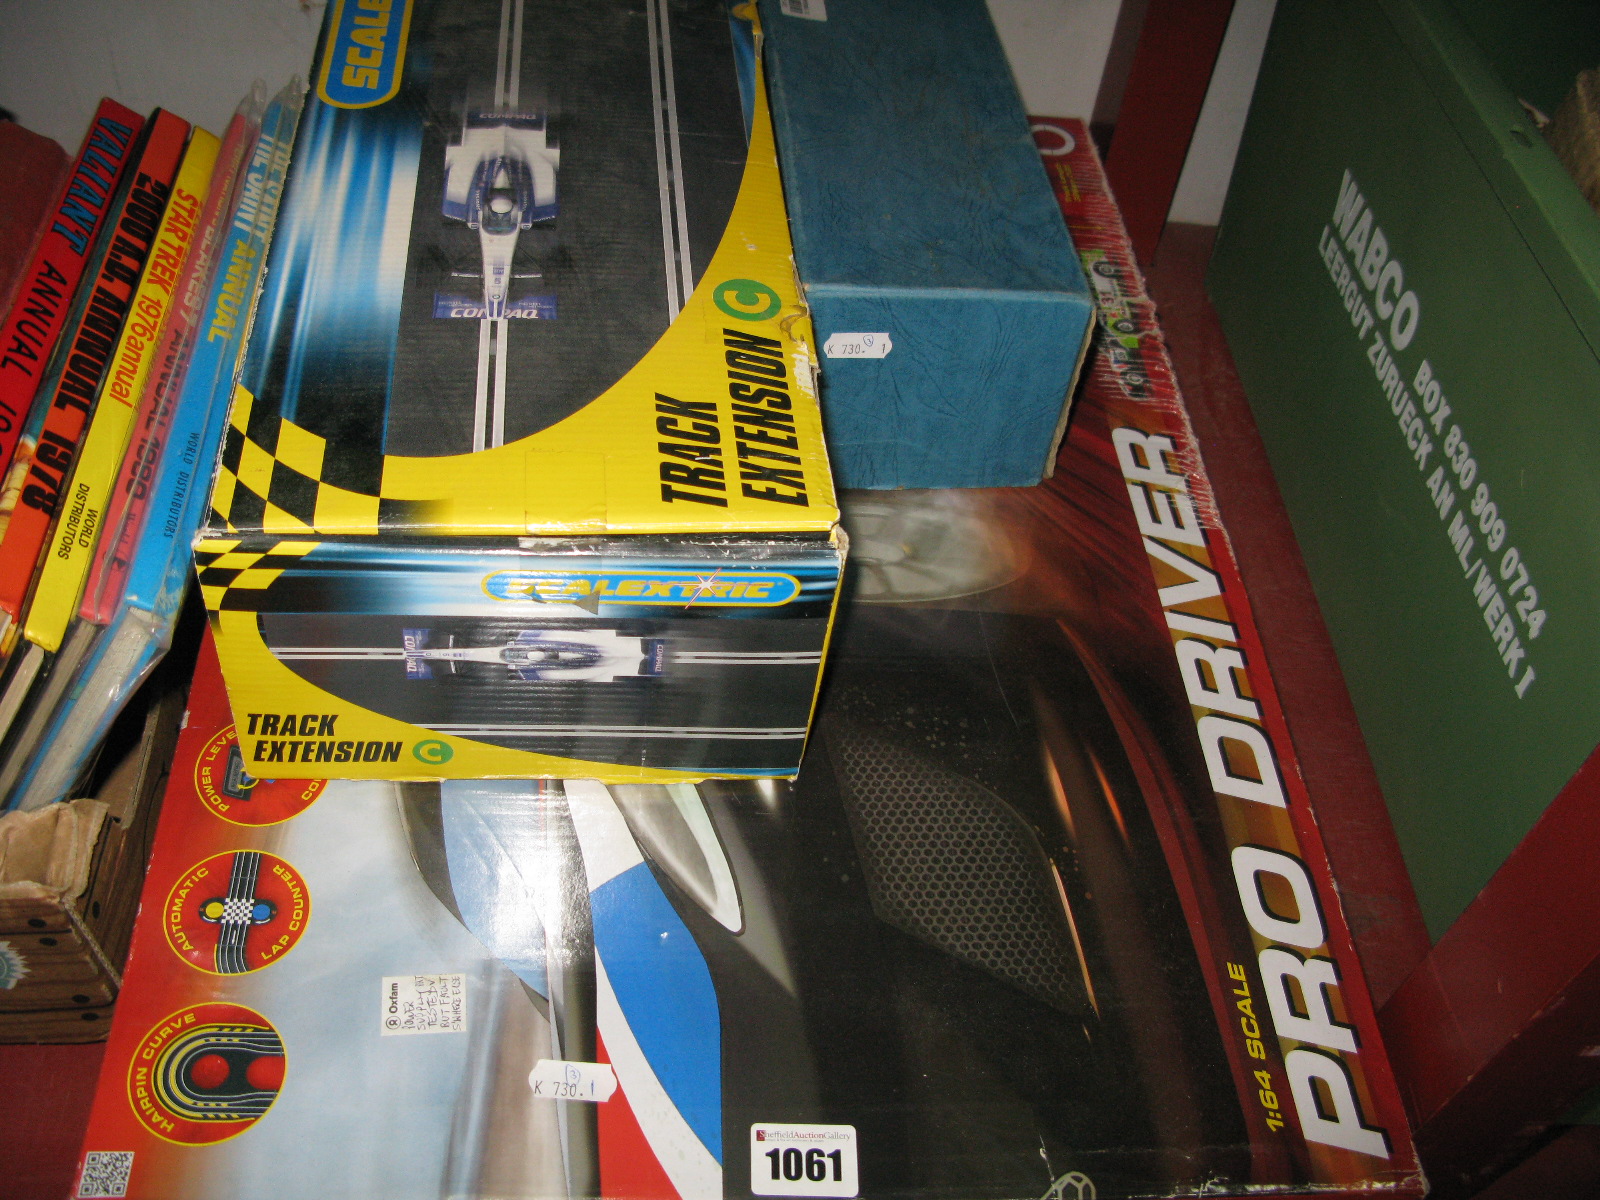 Nicol Toys Hammer Ball Set, Scalextric track extension and Pro Driver. (3)